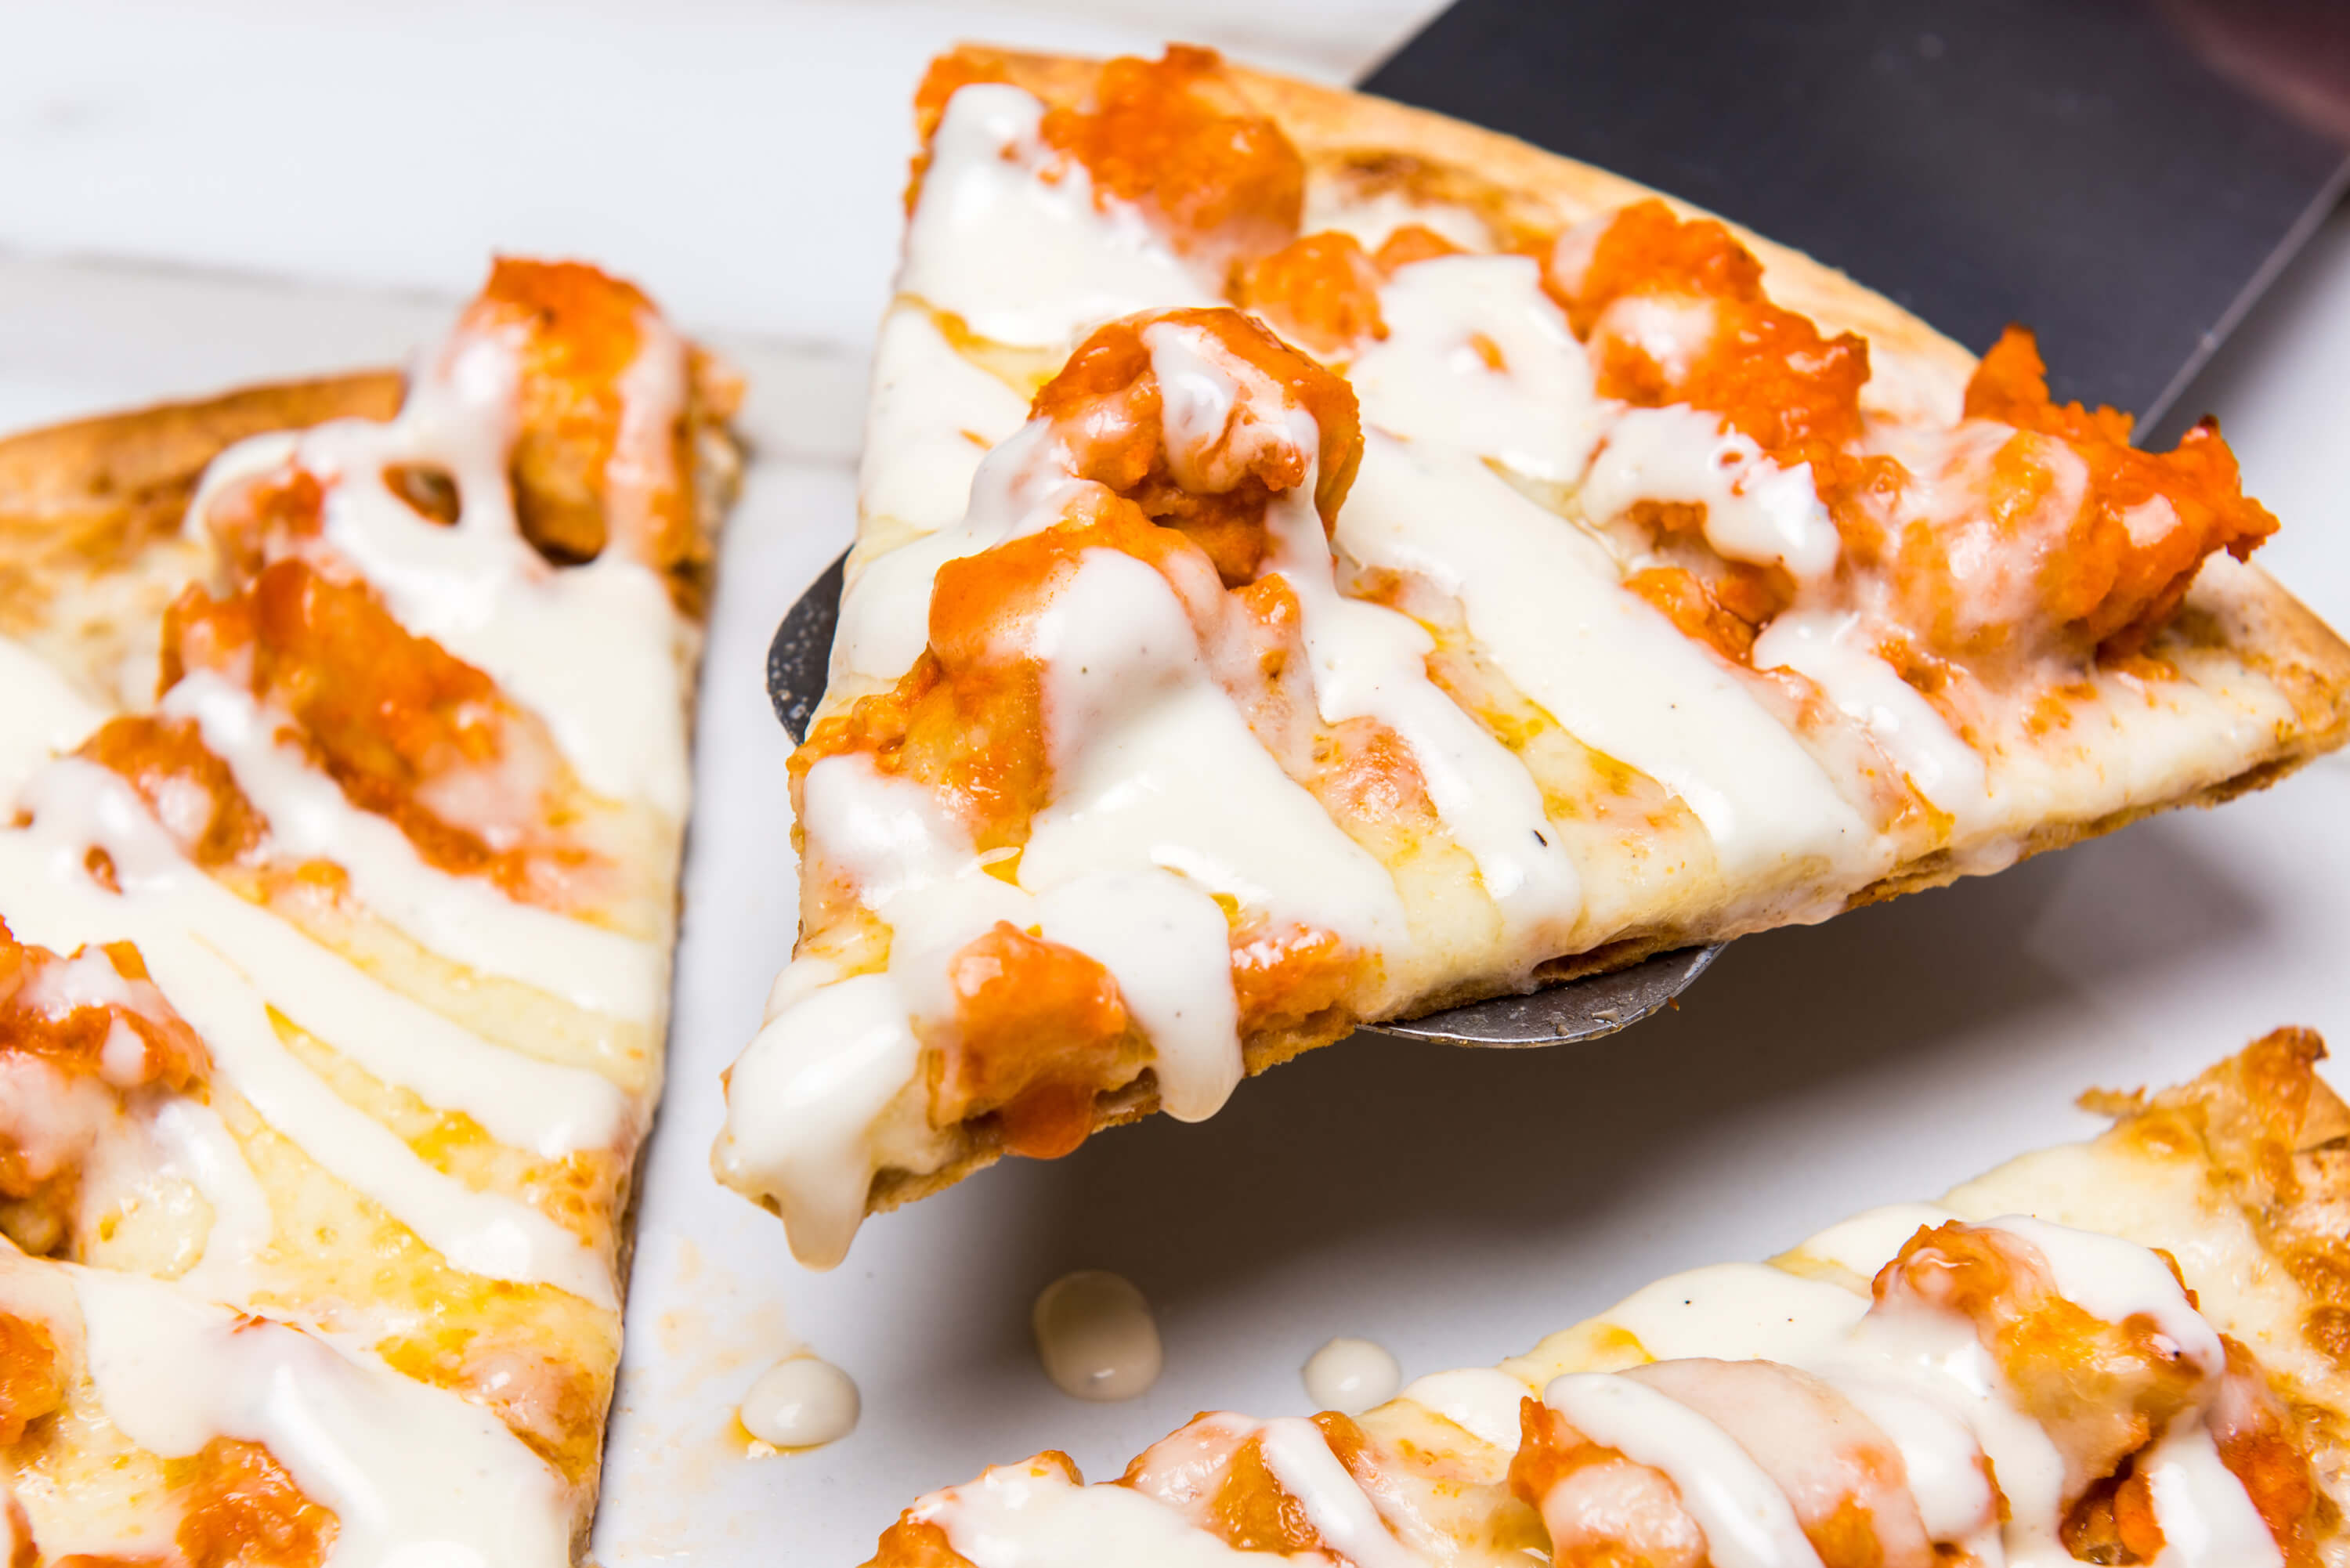 pieces of pizza with drizzled sauce